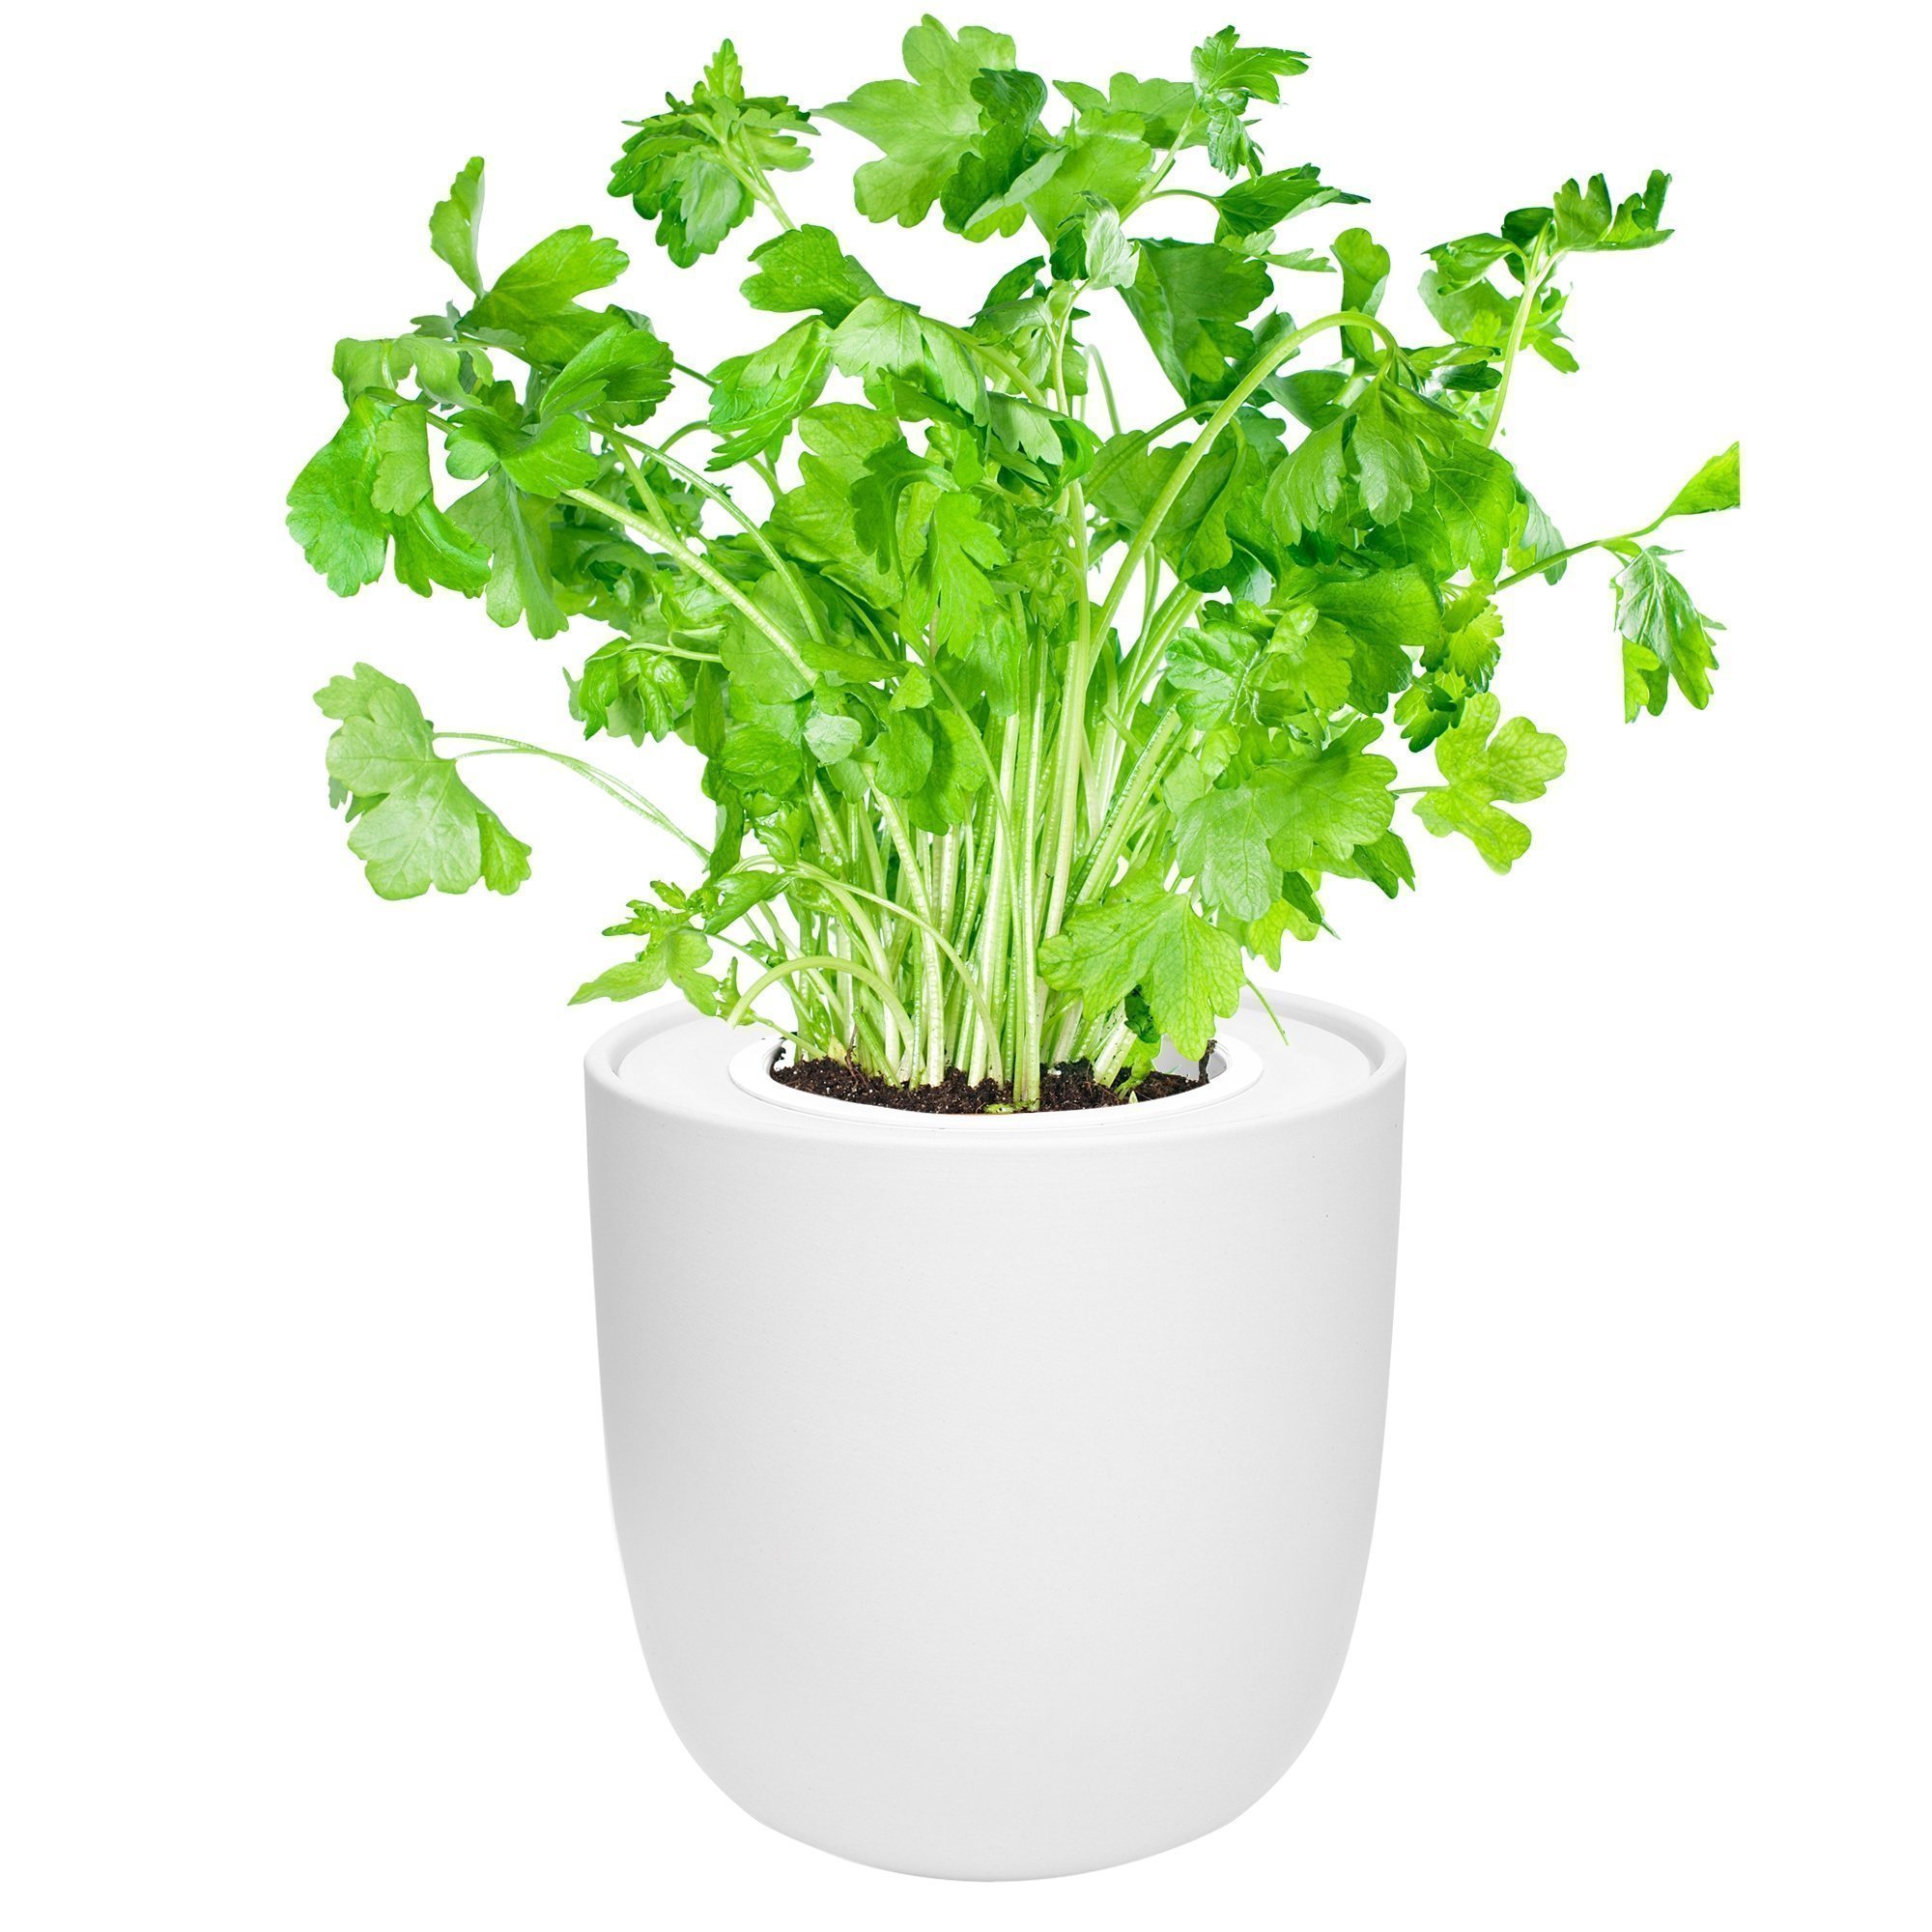 Hydroponic Herb Growing Kit with White Ceramic Pot and Seeds (Parsley)